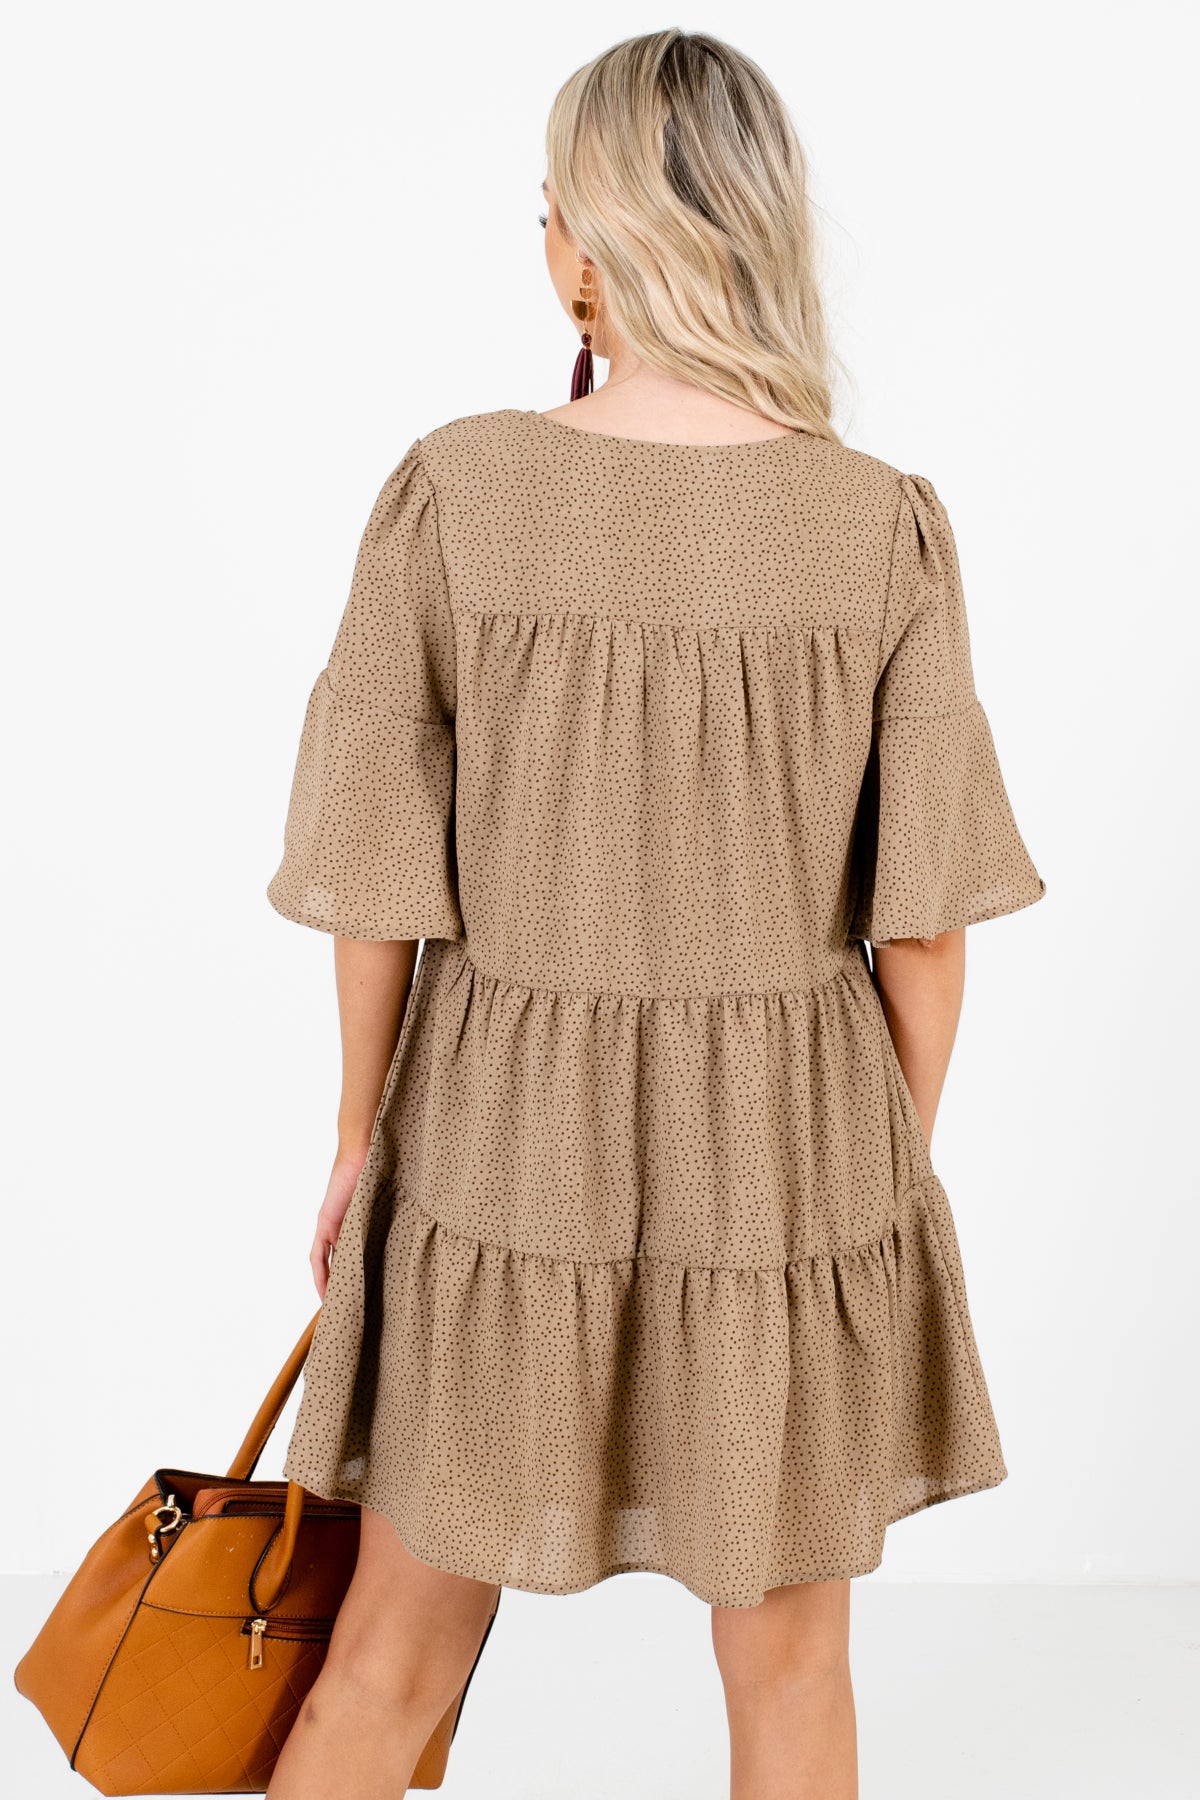 Women's Brown Tiered Ruffle Style Boutique Mini Dress